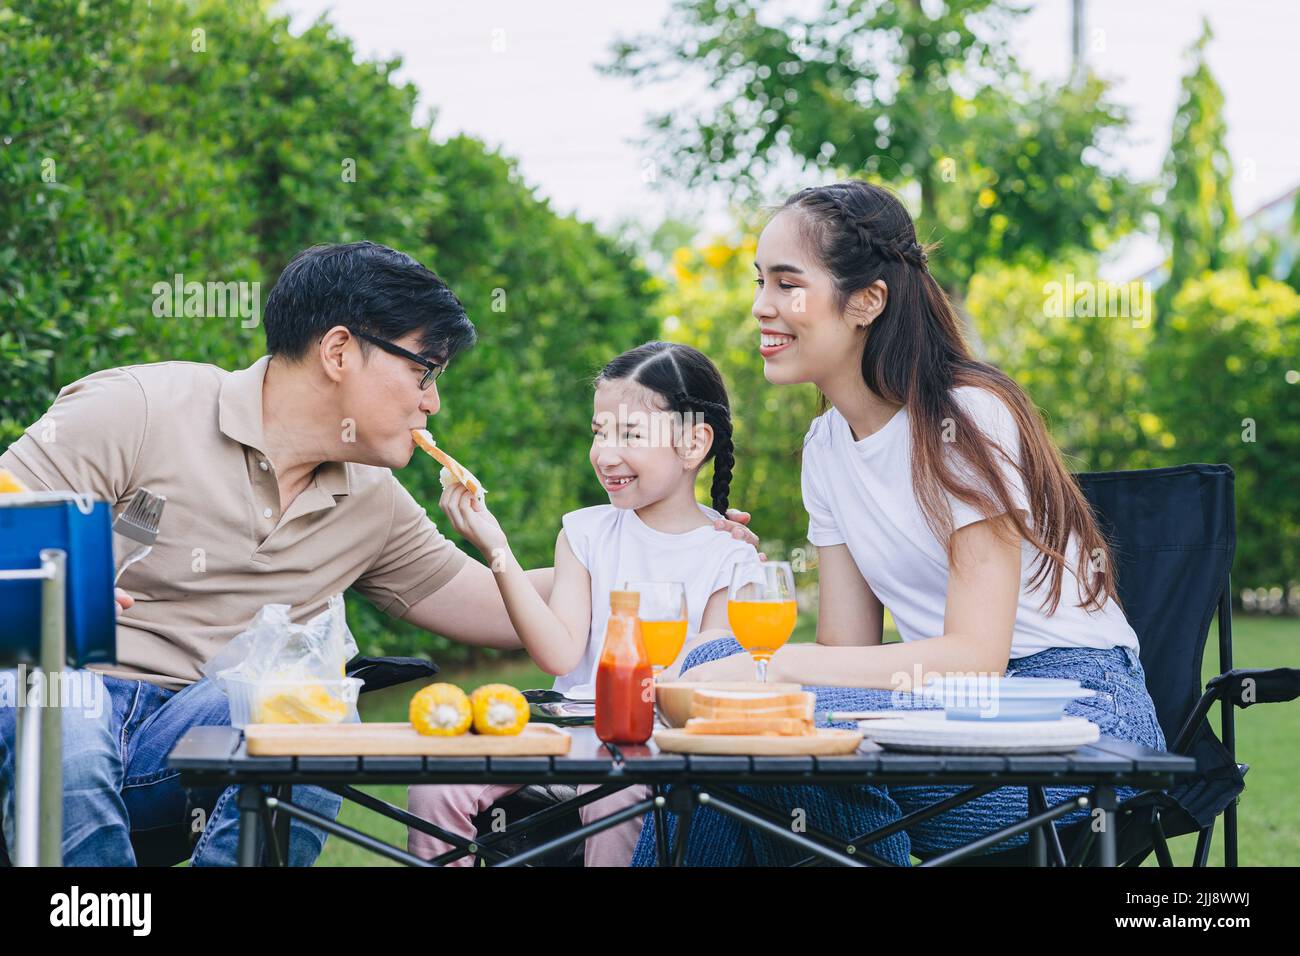 funny family outdoor party leisure activity parents with child cute lovely happy smile at backyard. Stock Photo